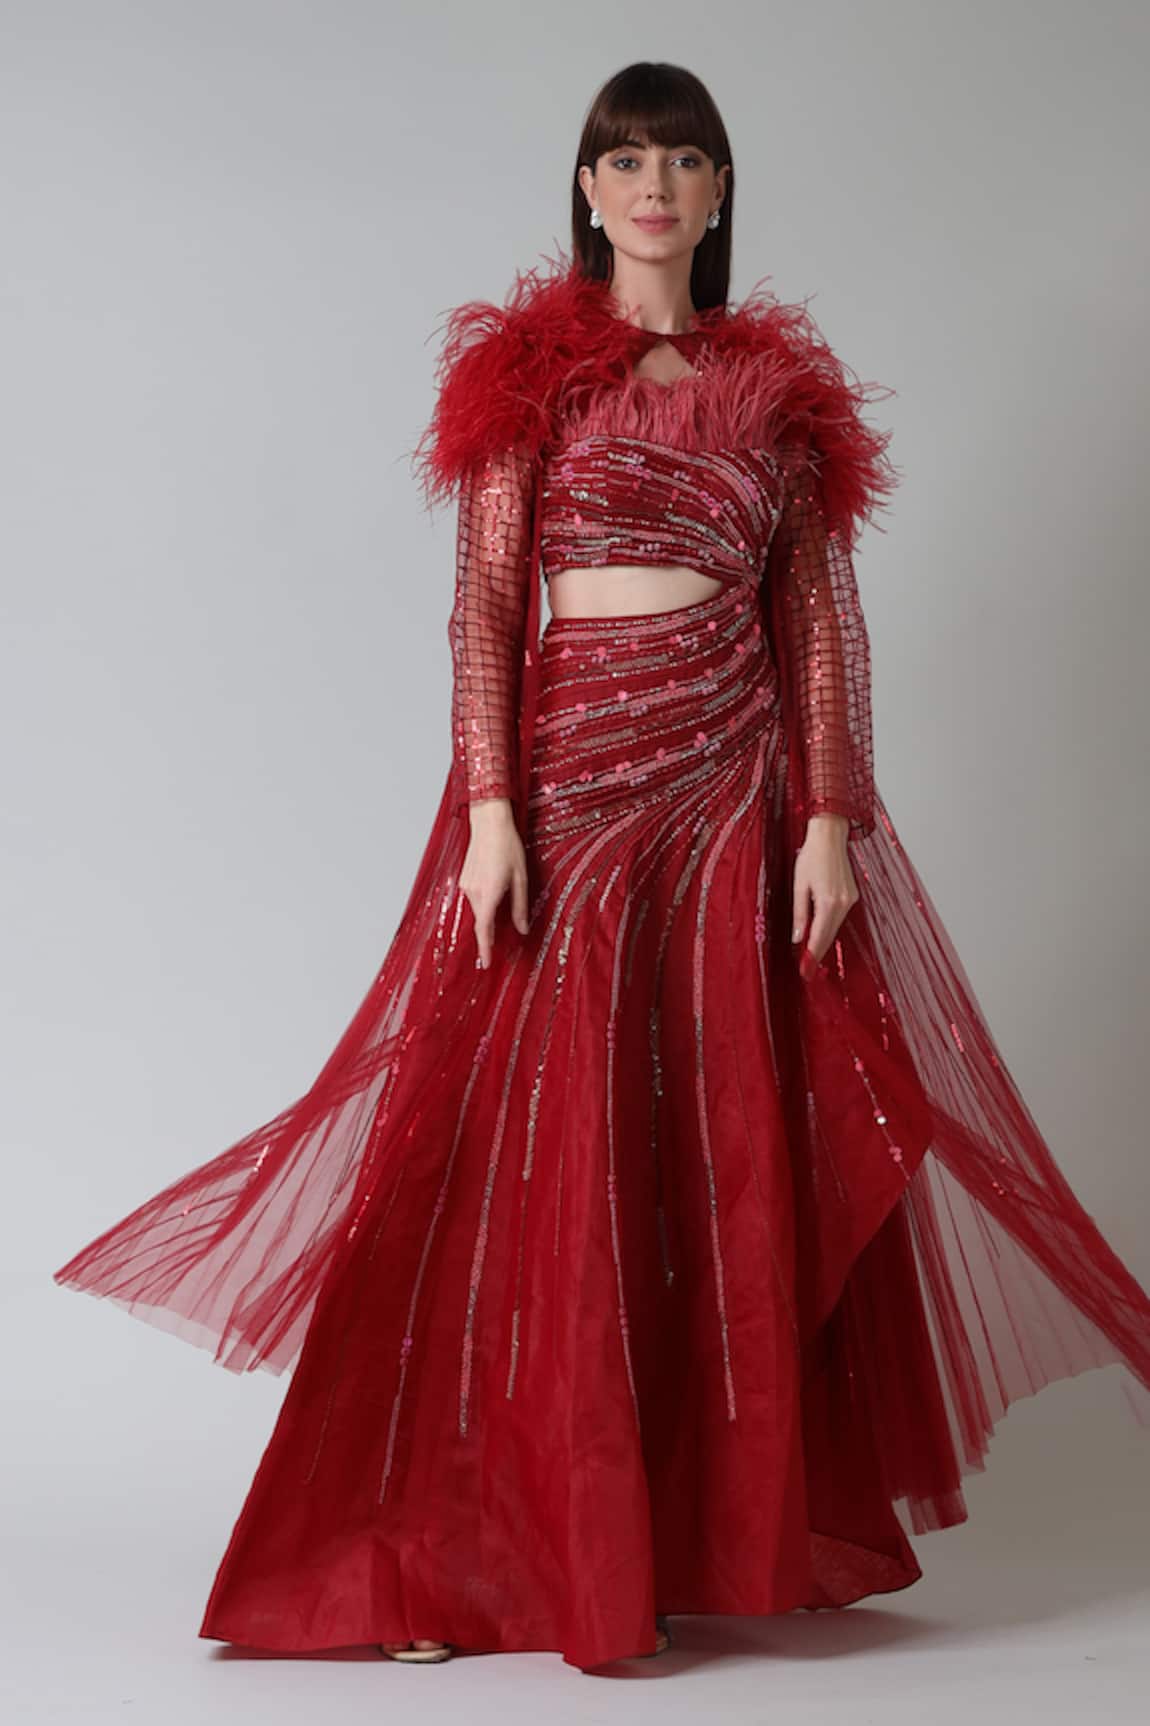 Geisha Designs Lisette Feather Fringed Gown With Cape